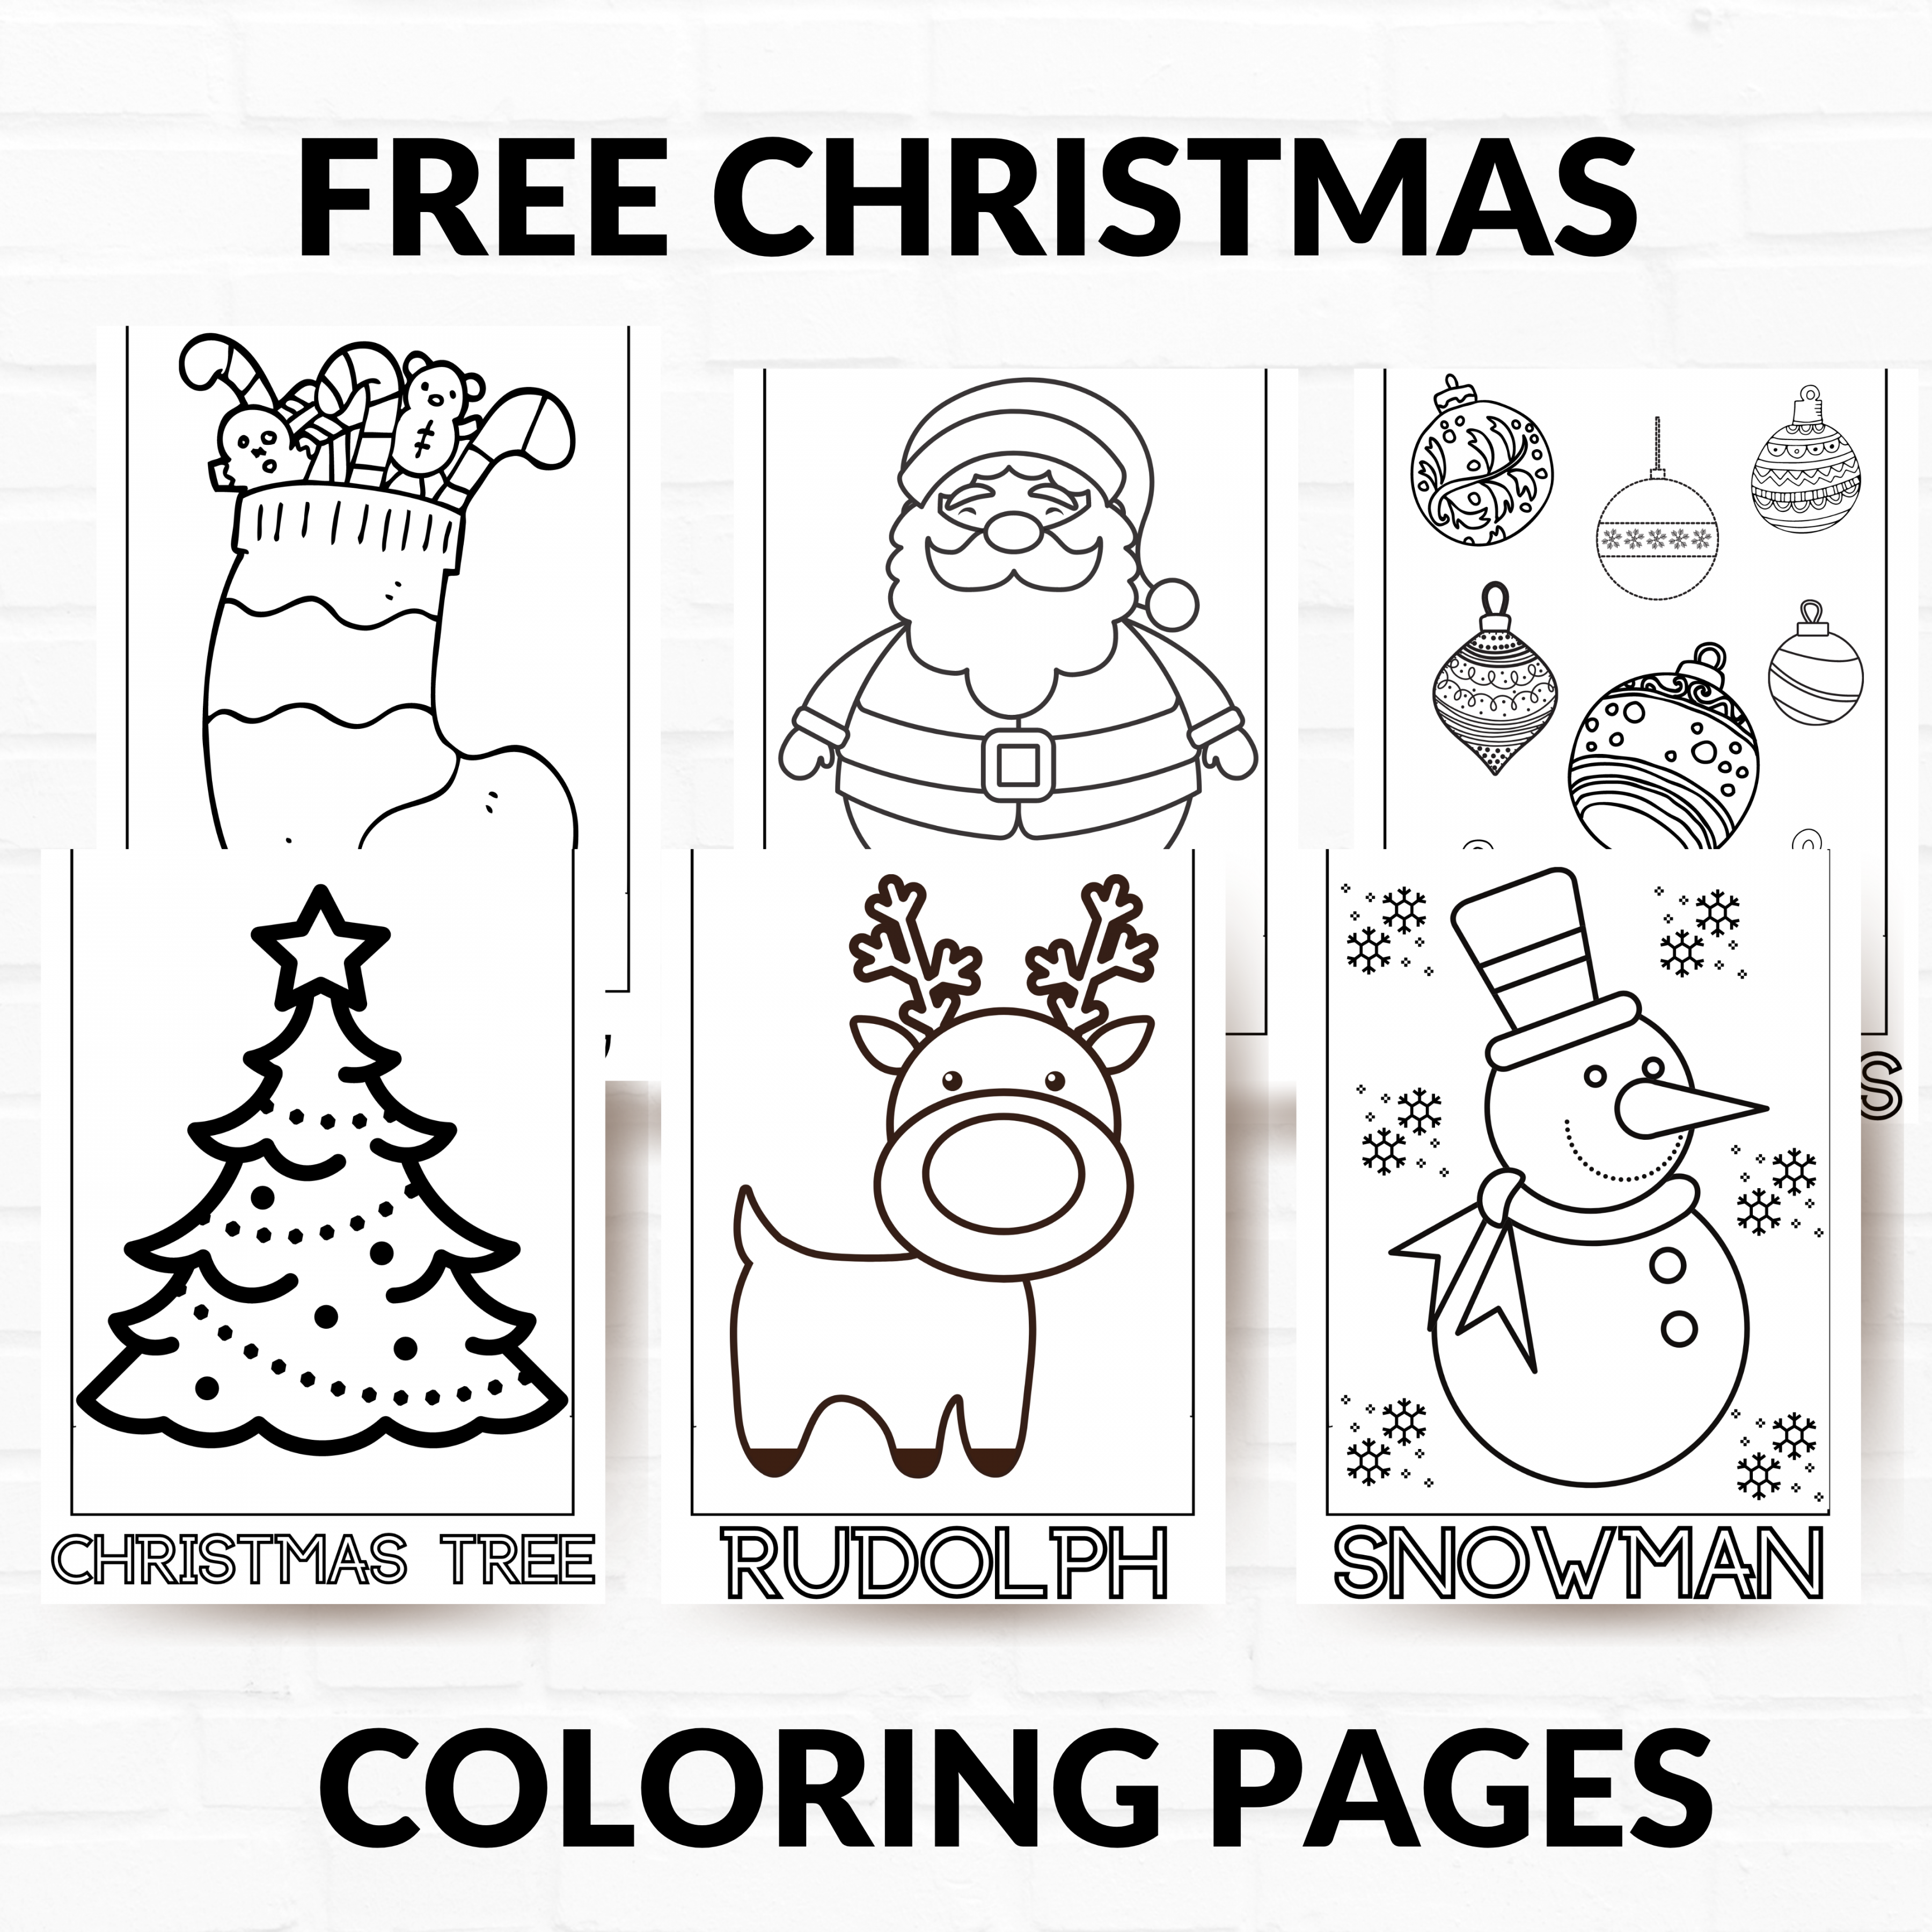 Christmas Coloring Pages Printable Free - Printable - Free Printable Christmas Coloring Pages - About a Mom